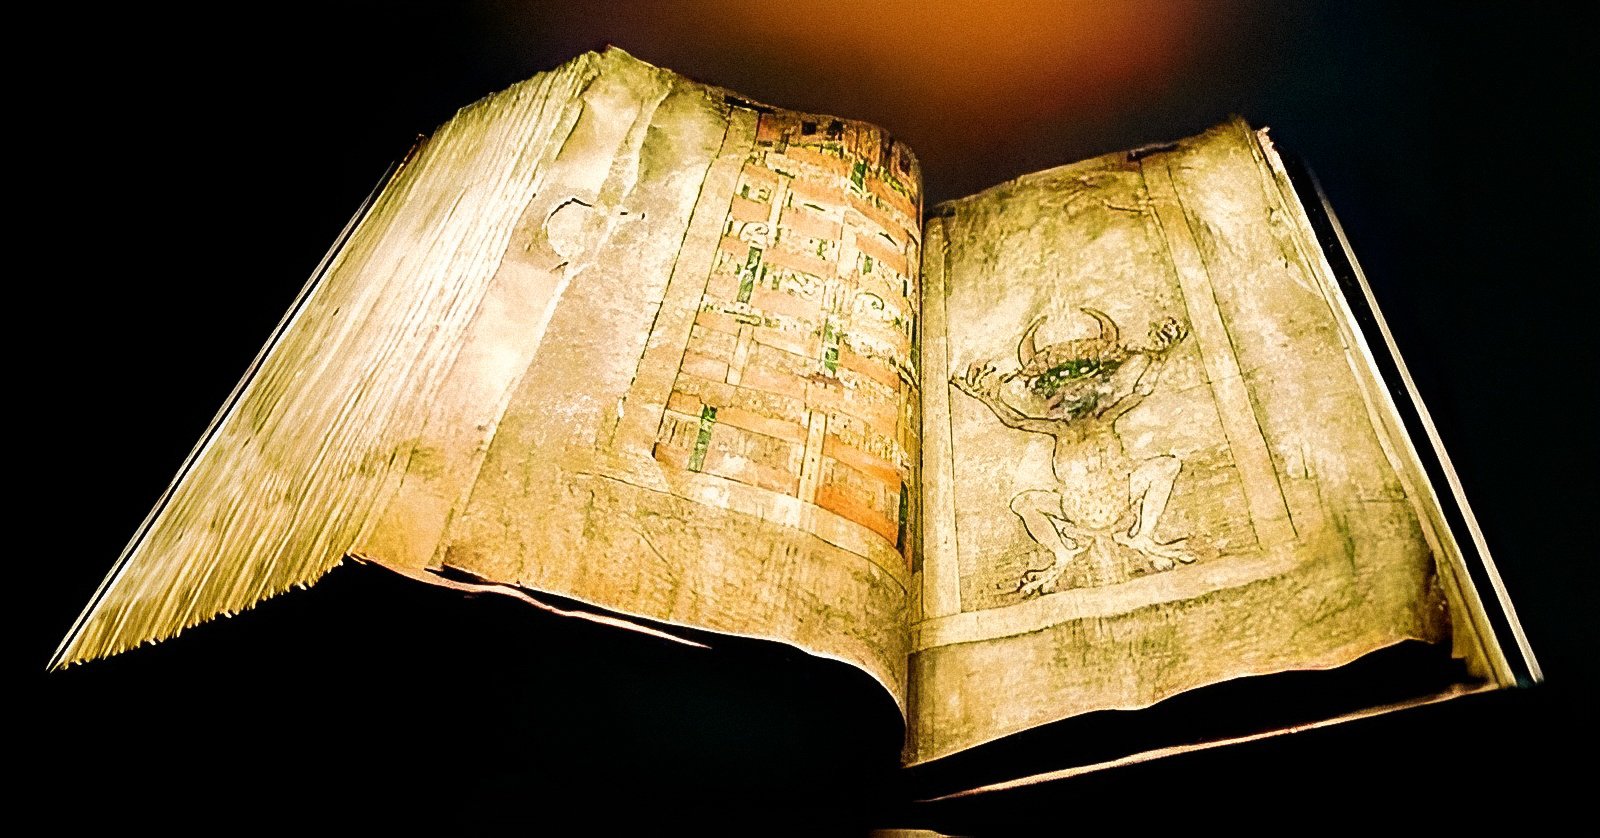 Codex Gigas, also known as 'the Devil's Bible,' is the largest and probably one of the strangest medieval manuscripts in the world. National Geographic